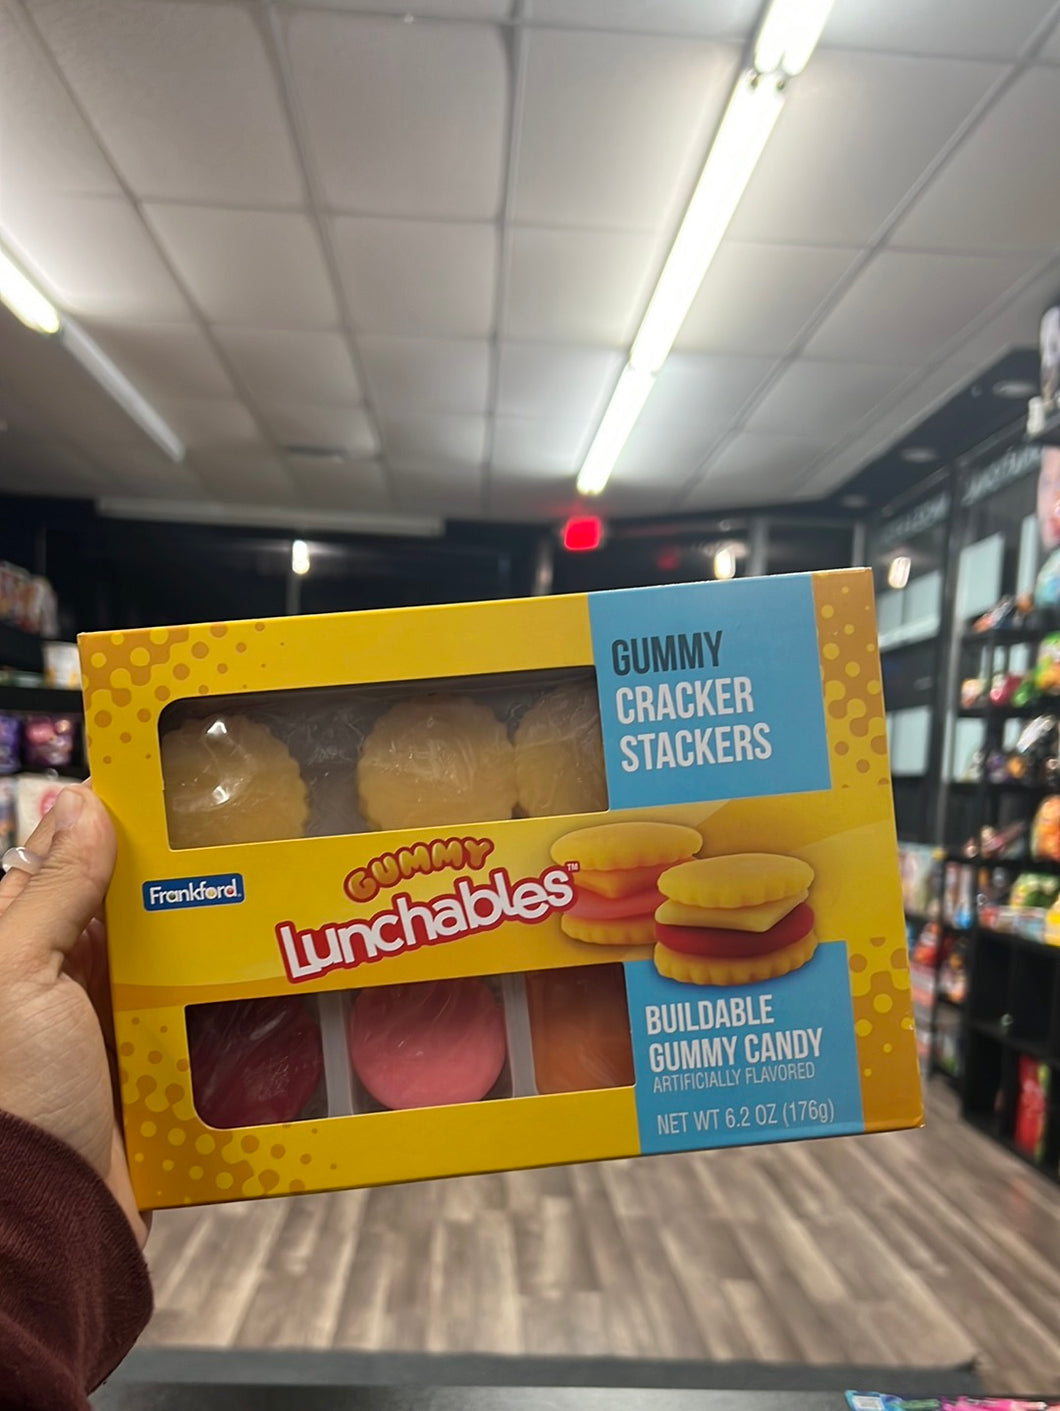 Lunchables Gummy Cracker Stackers (USA)